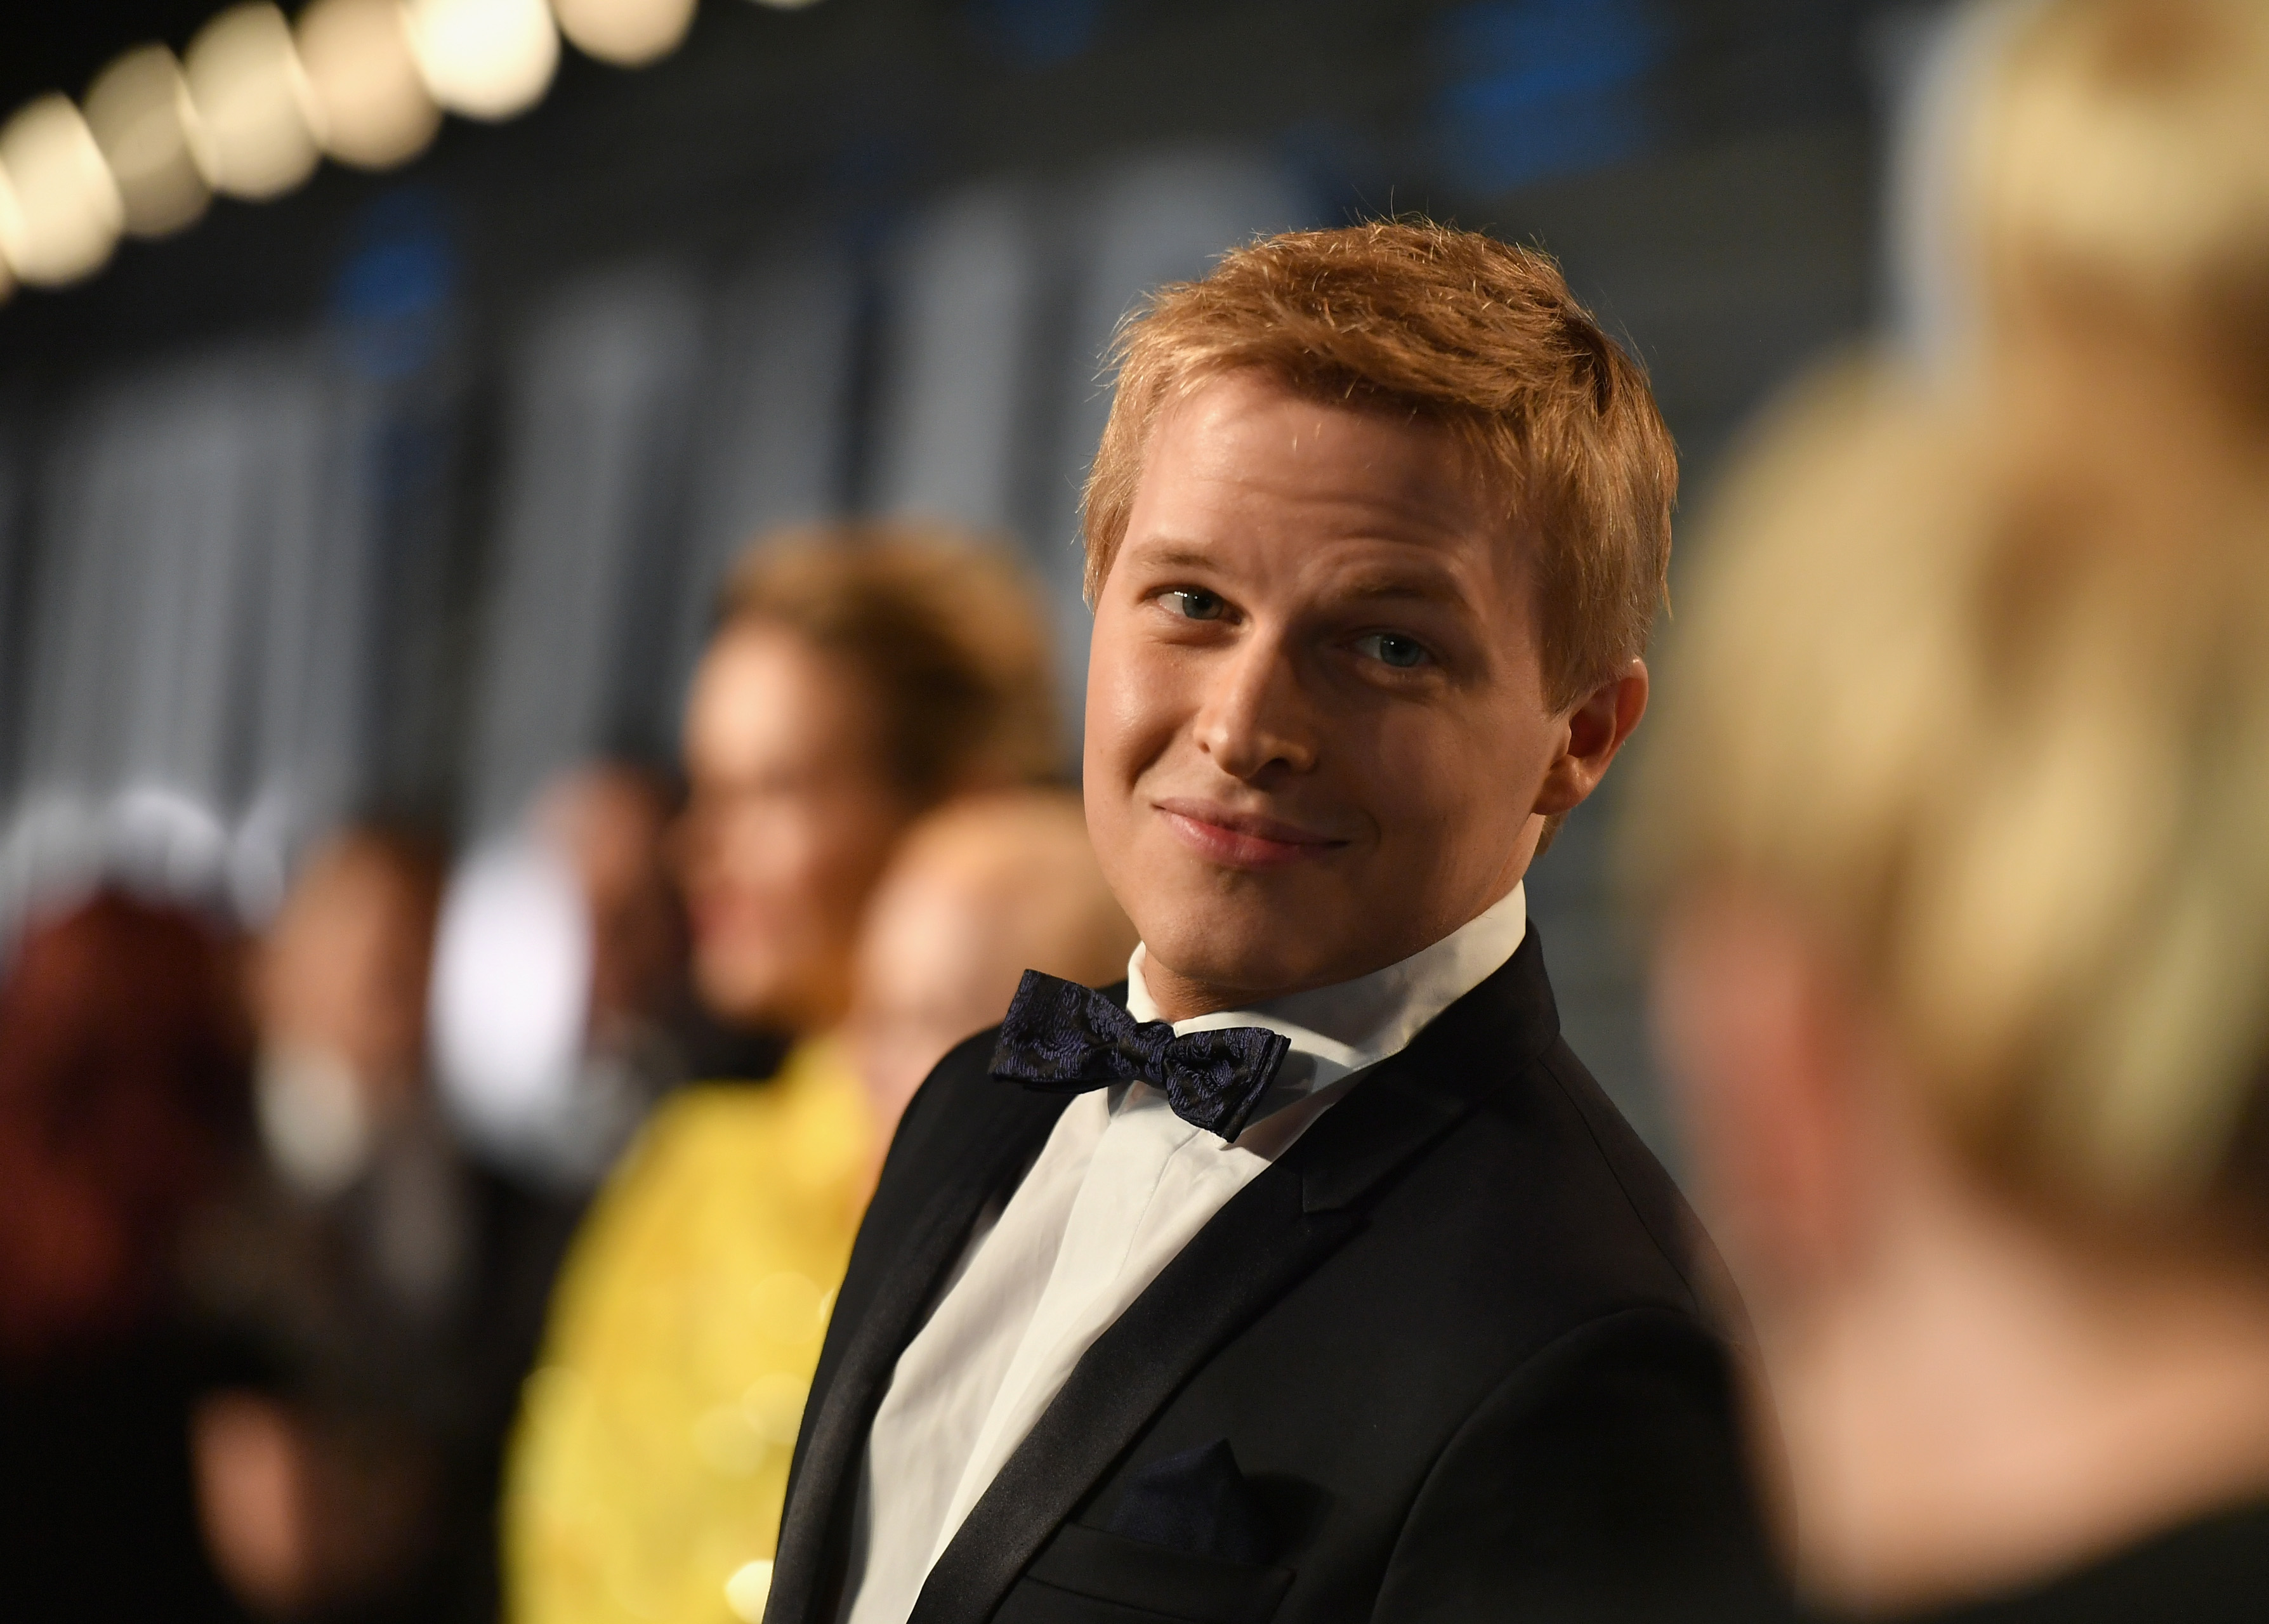 Ronan Farrow attends the 2018 Vanity Fair Oscar Party. (Mike Coppola/VF18—Getty Images for VF)